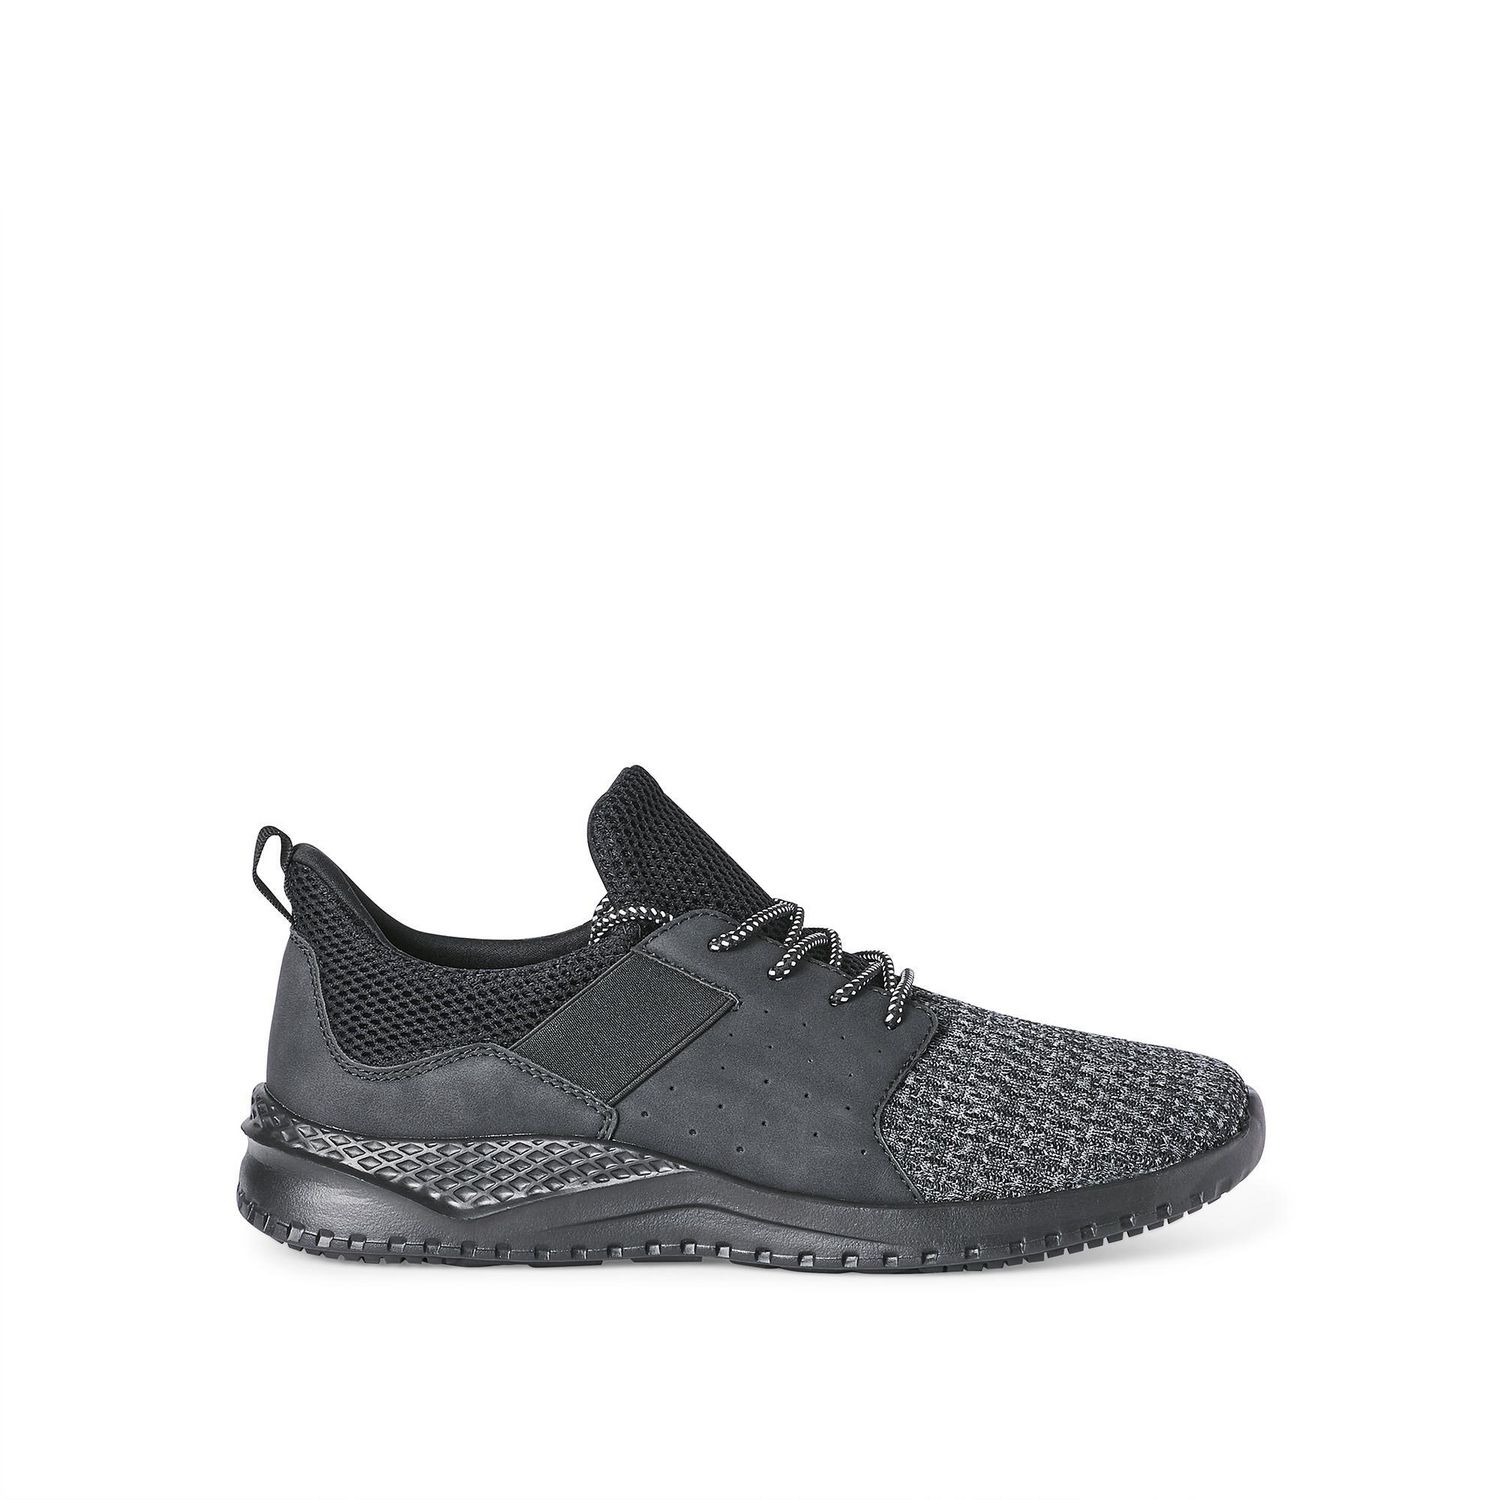 Athletic Works Men's Cage Sneakers | Walmart Canada